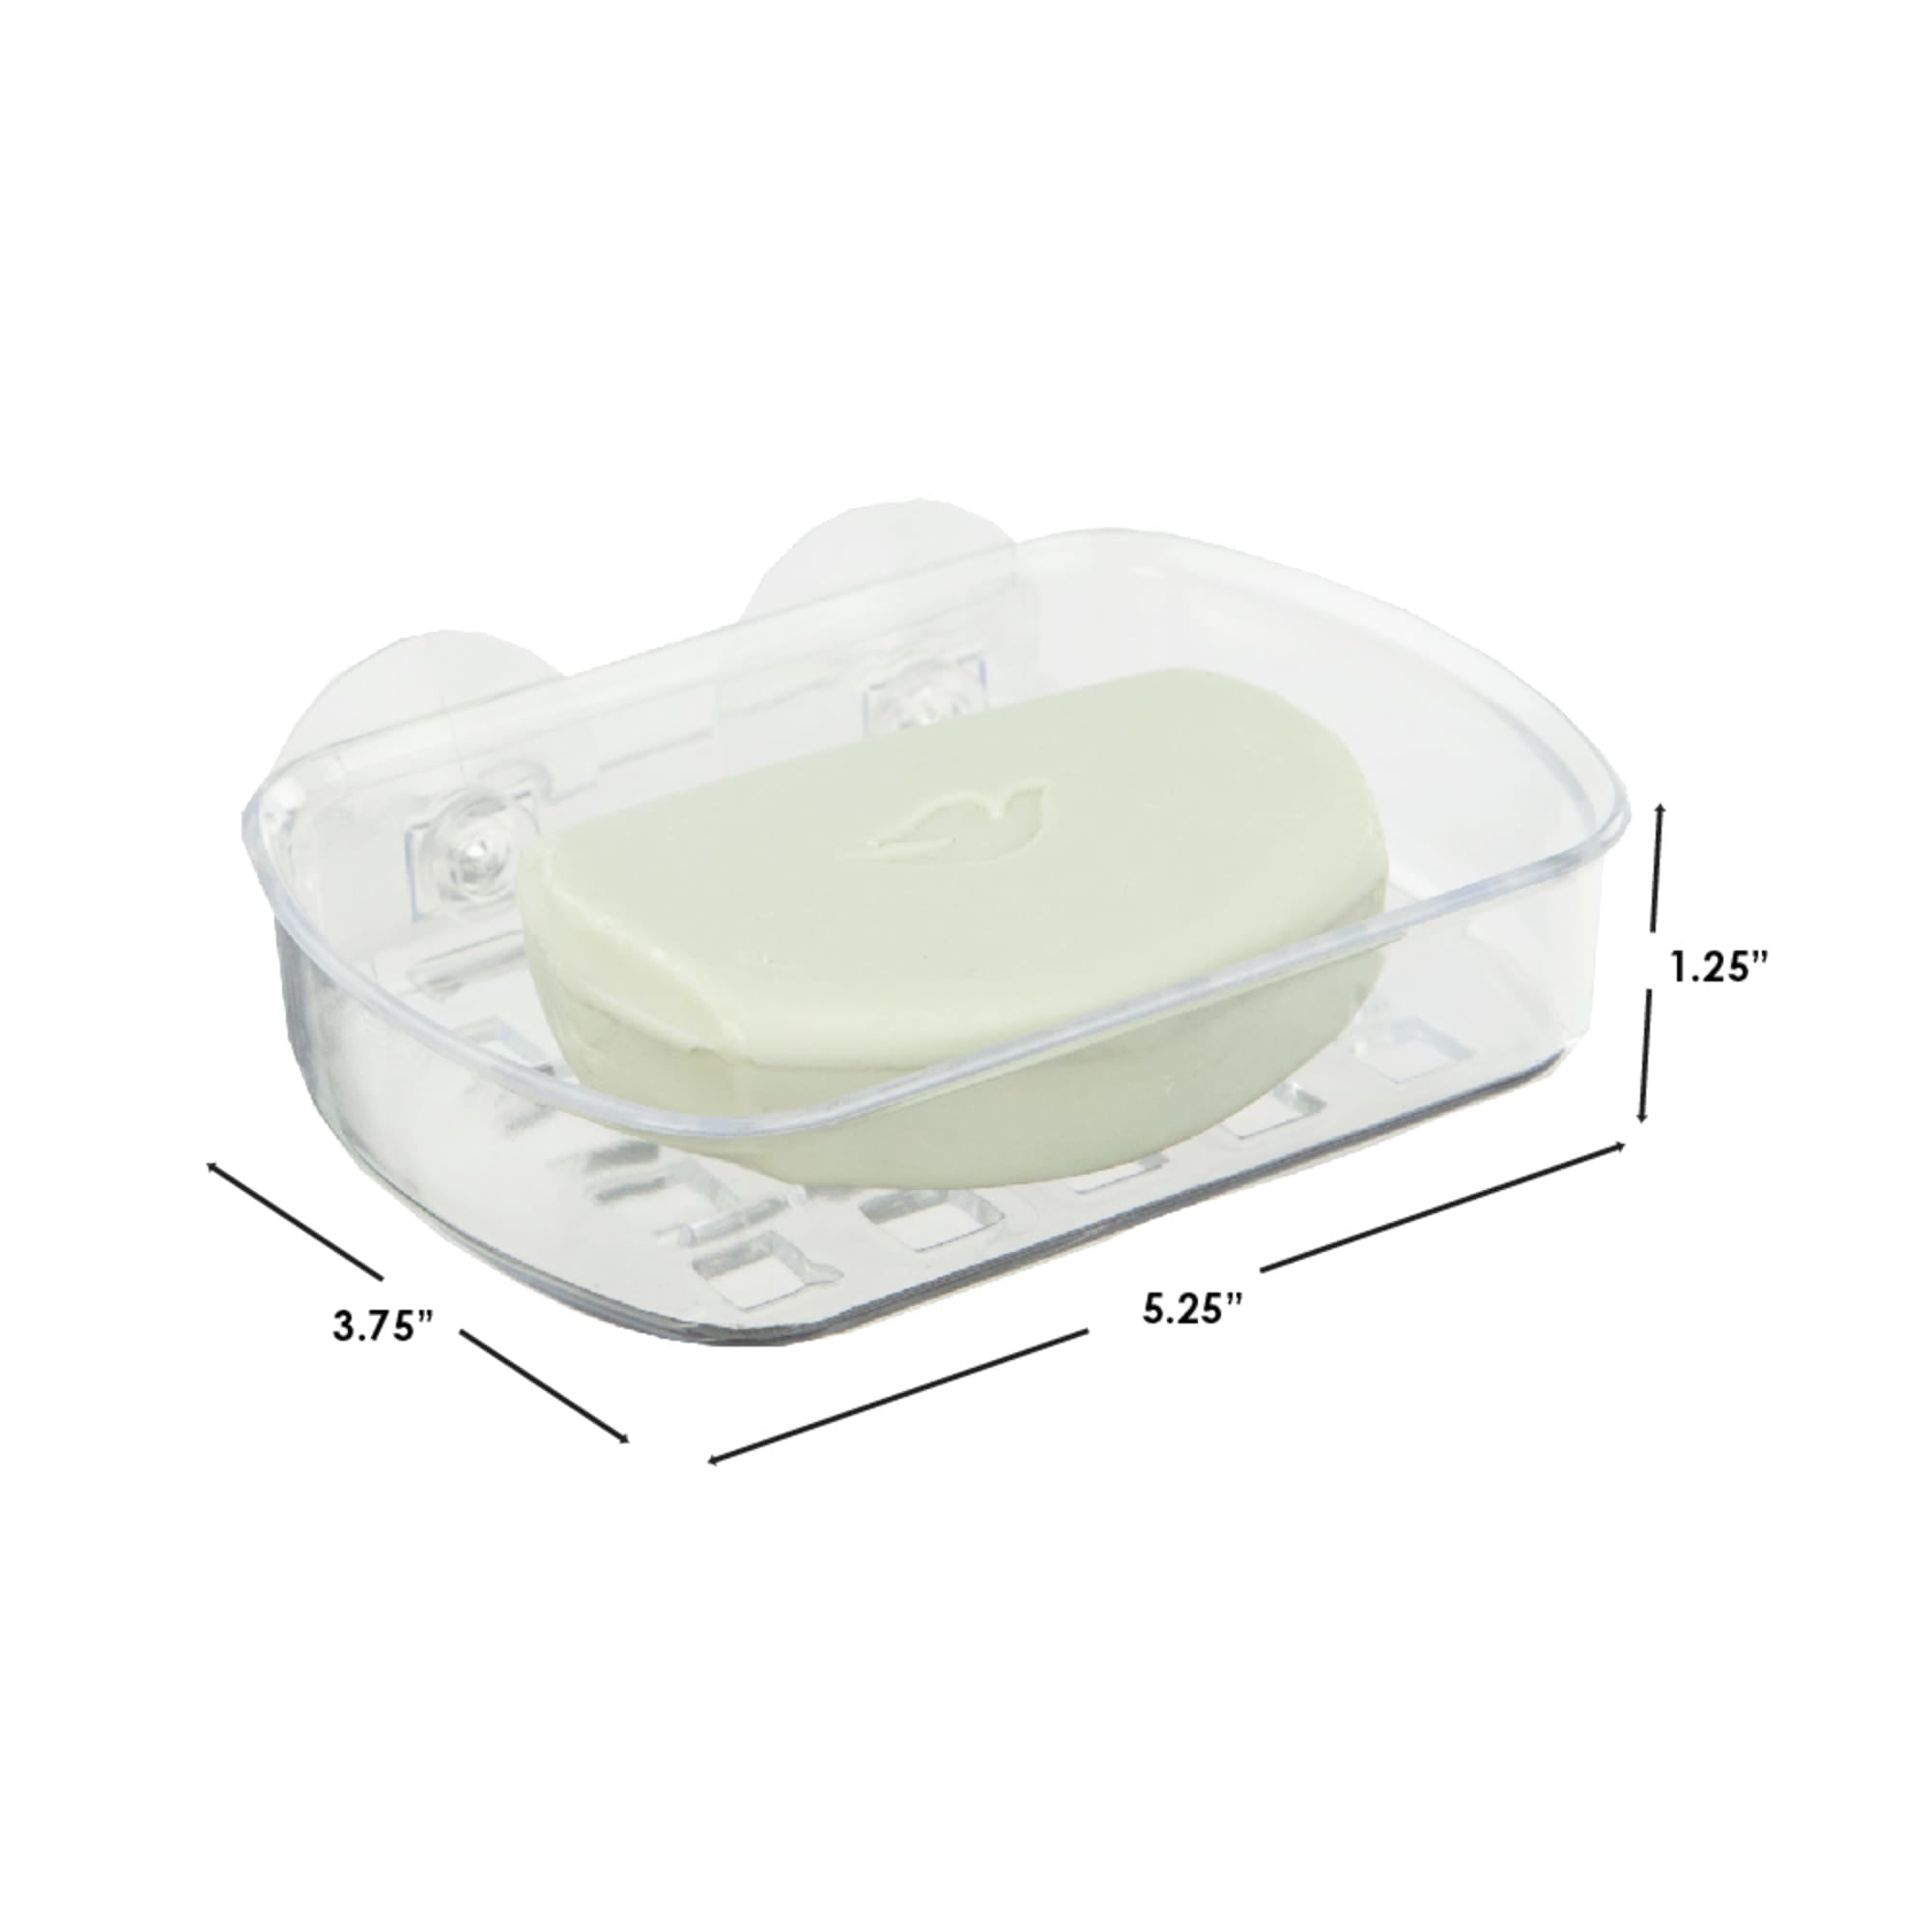 Home Basics Soap Dish with Suction Cups $1.50 EACH, CASE PACK OF 24